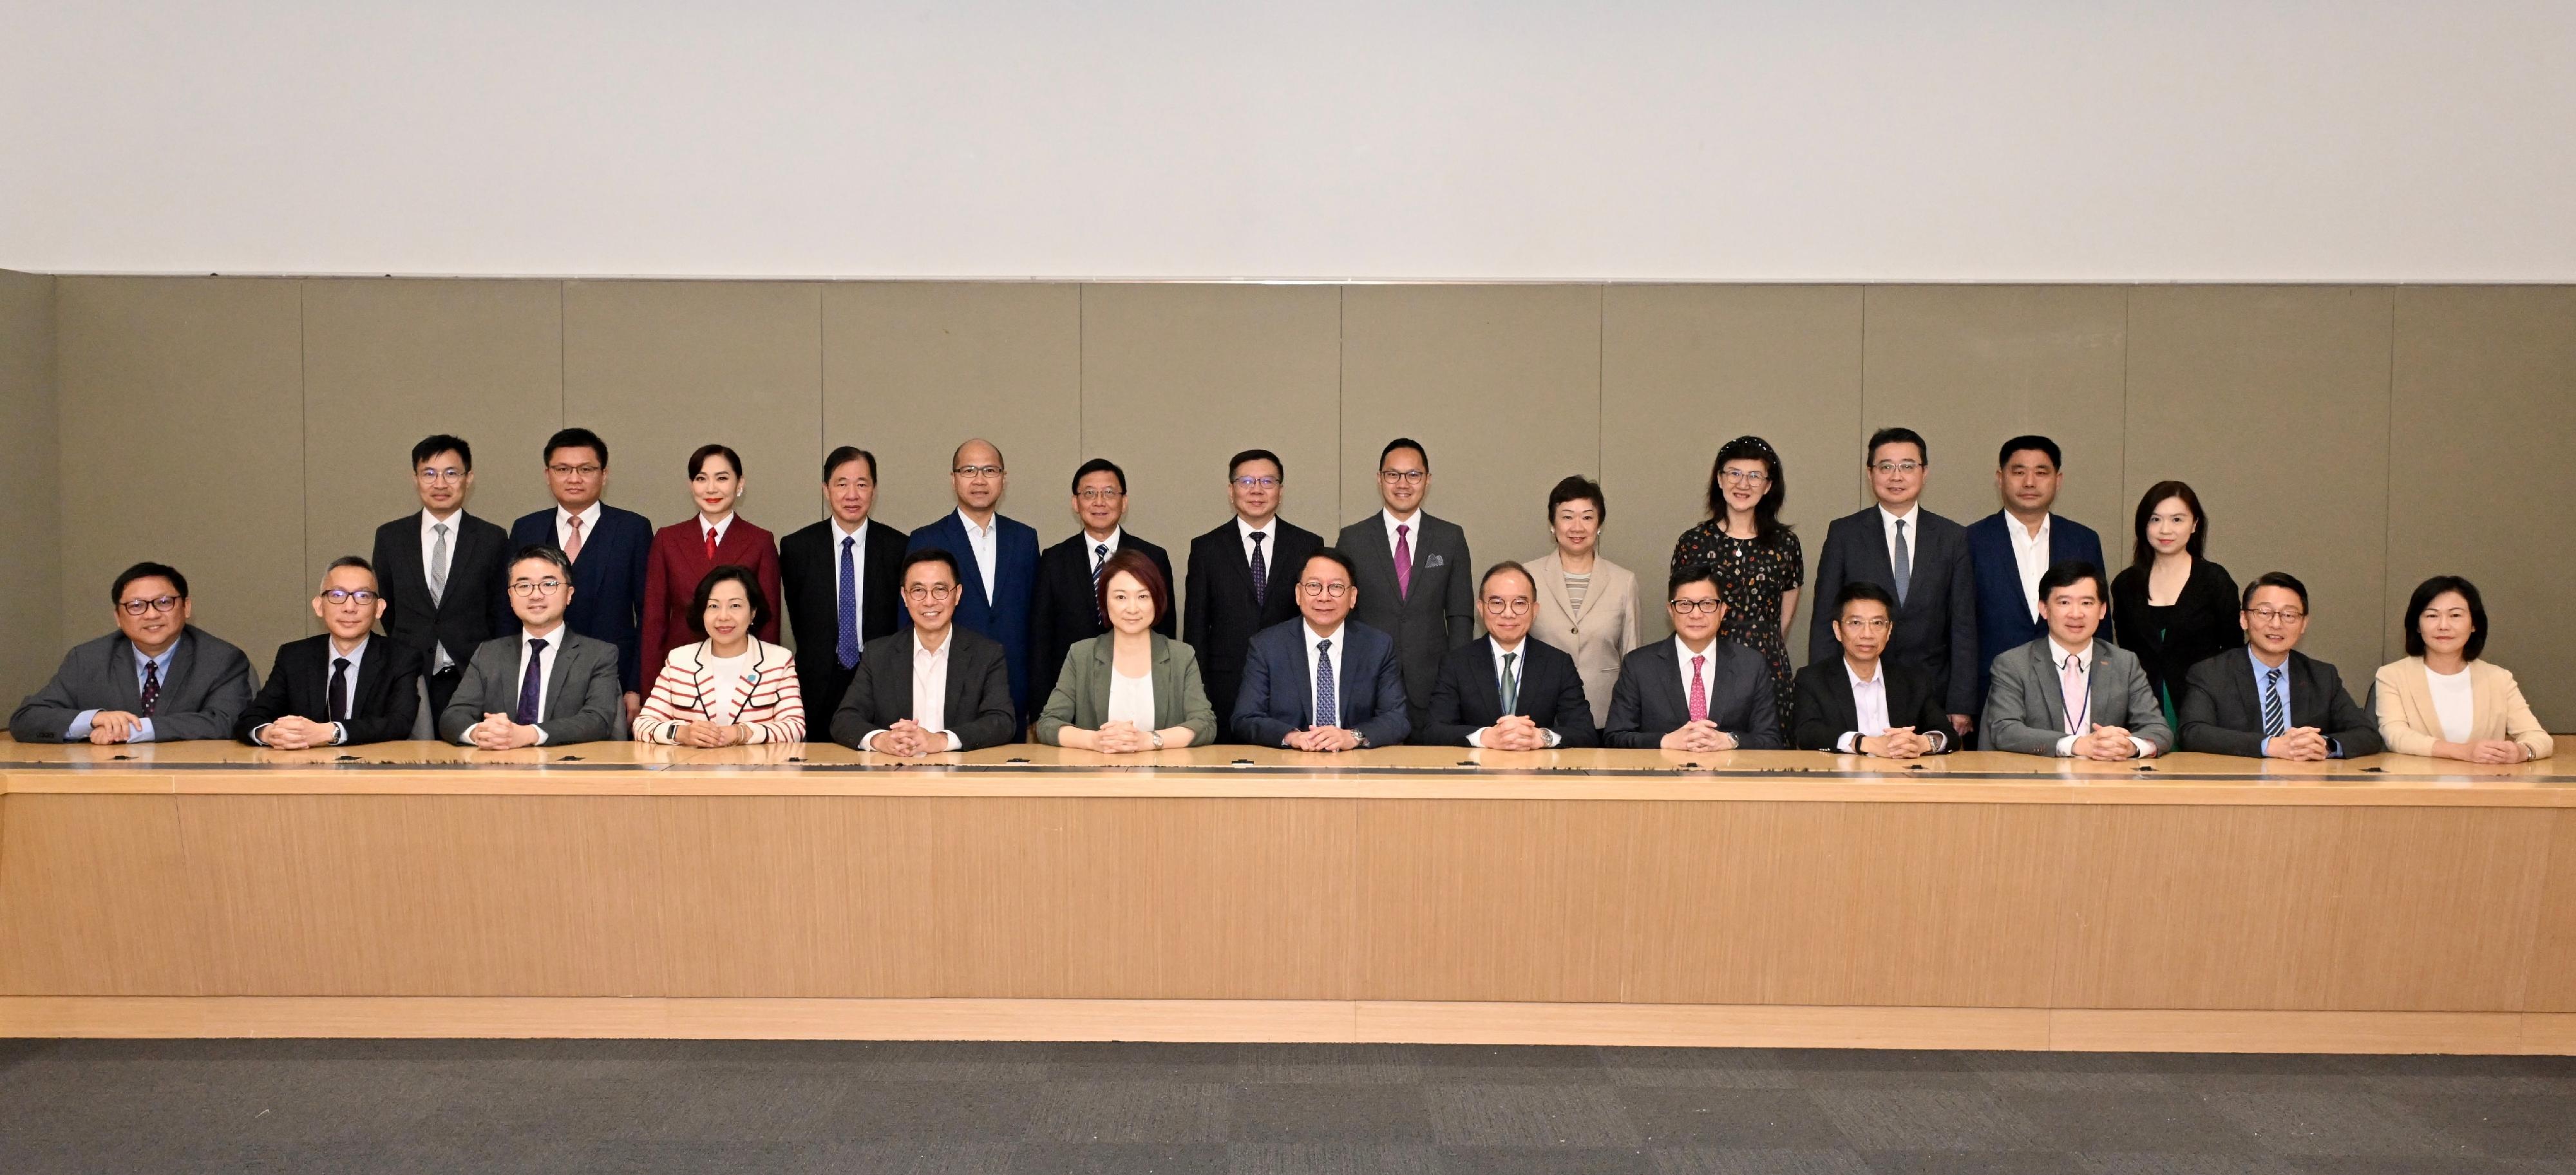 The Working Group on Patriotic Education under the Constitution and Basic Law Promotion Steering Committee (CBLPSC) today (April 29) holds its first meeting. Photo shows the Chairman of the CBLPSC and Chief Secretary for Administration, Mr Chan Kwok-ki (front row, centre), together with the Convenor of the Working Group, Ms Starry Lee (front row, sixth left), the Secretary for Constitutional and Mainland Affairs, Mr Erick Tsang Kwok-wai (front row, sixth right), and other members of the Working Group before the meeting.